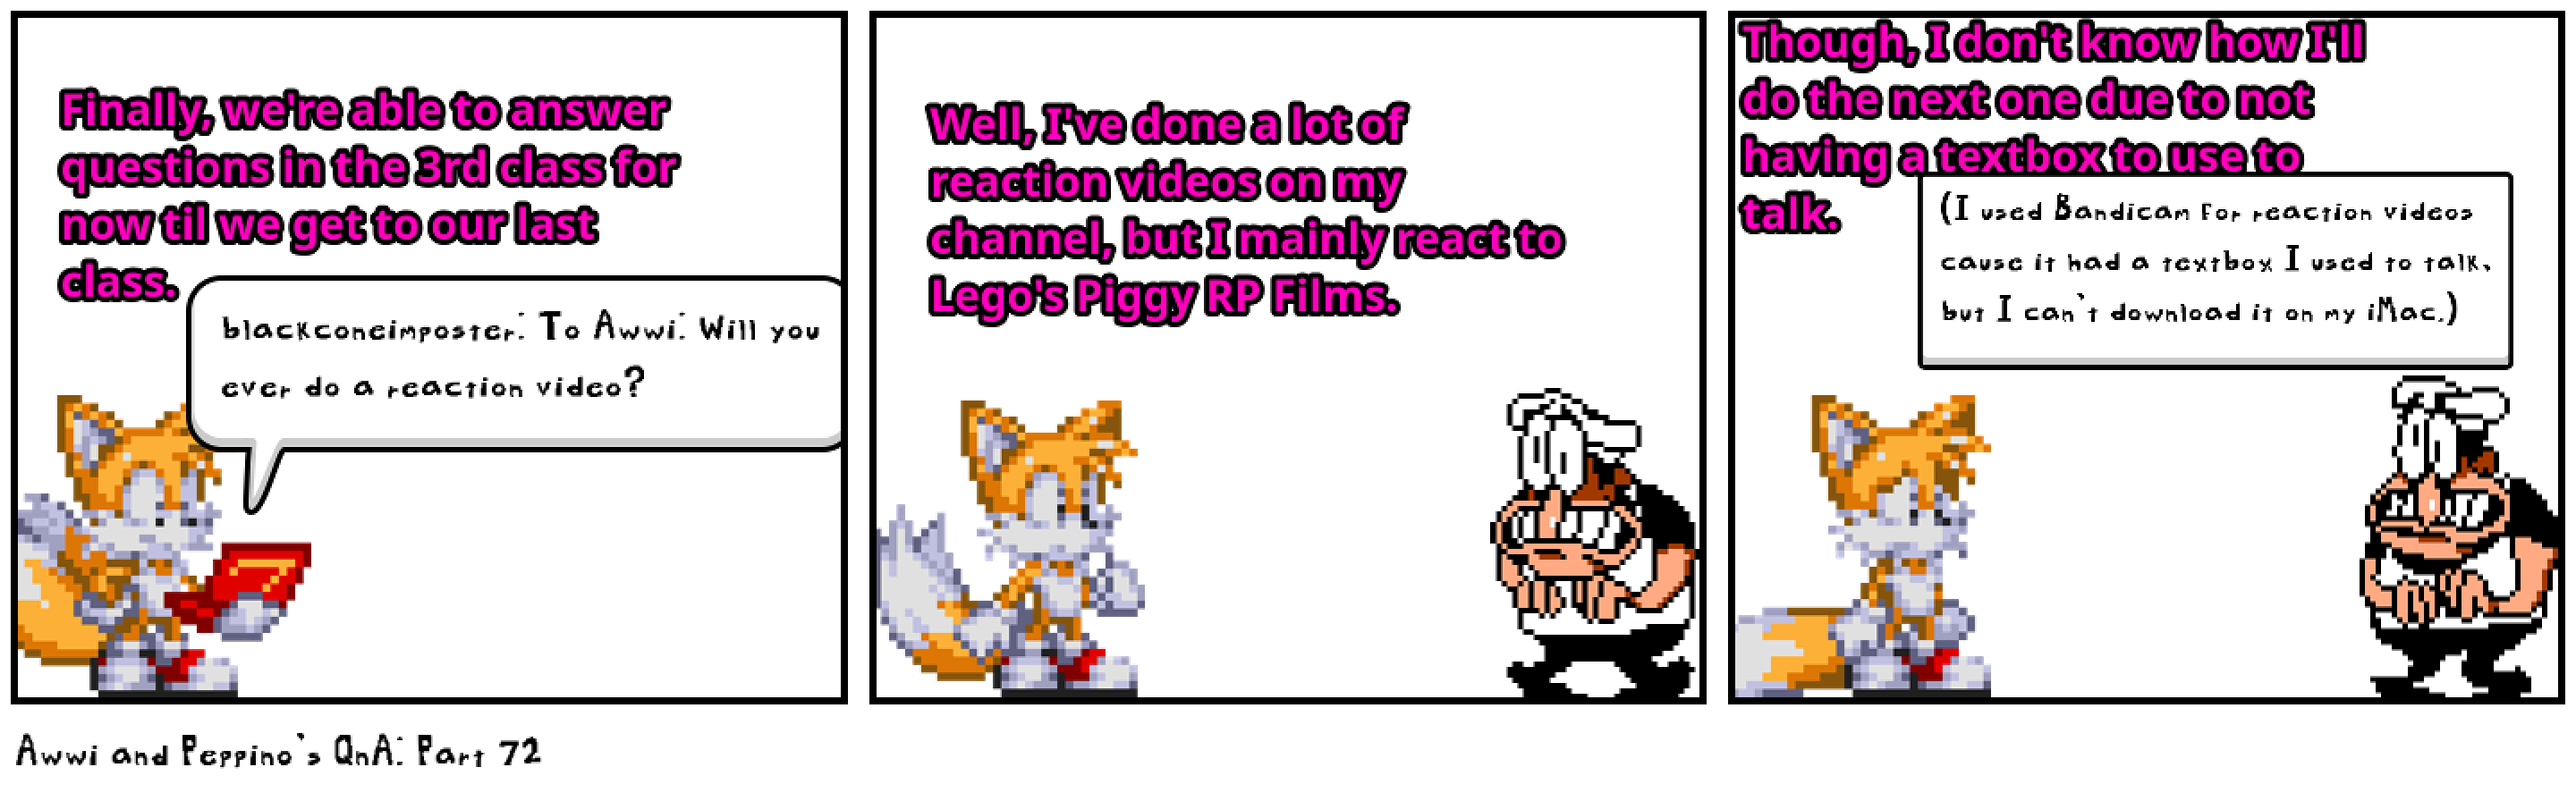 Awwi and Peppino's QnA: Part 72